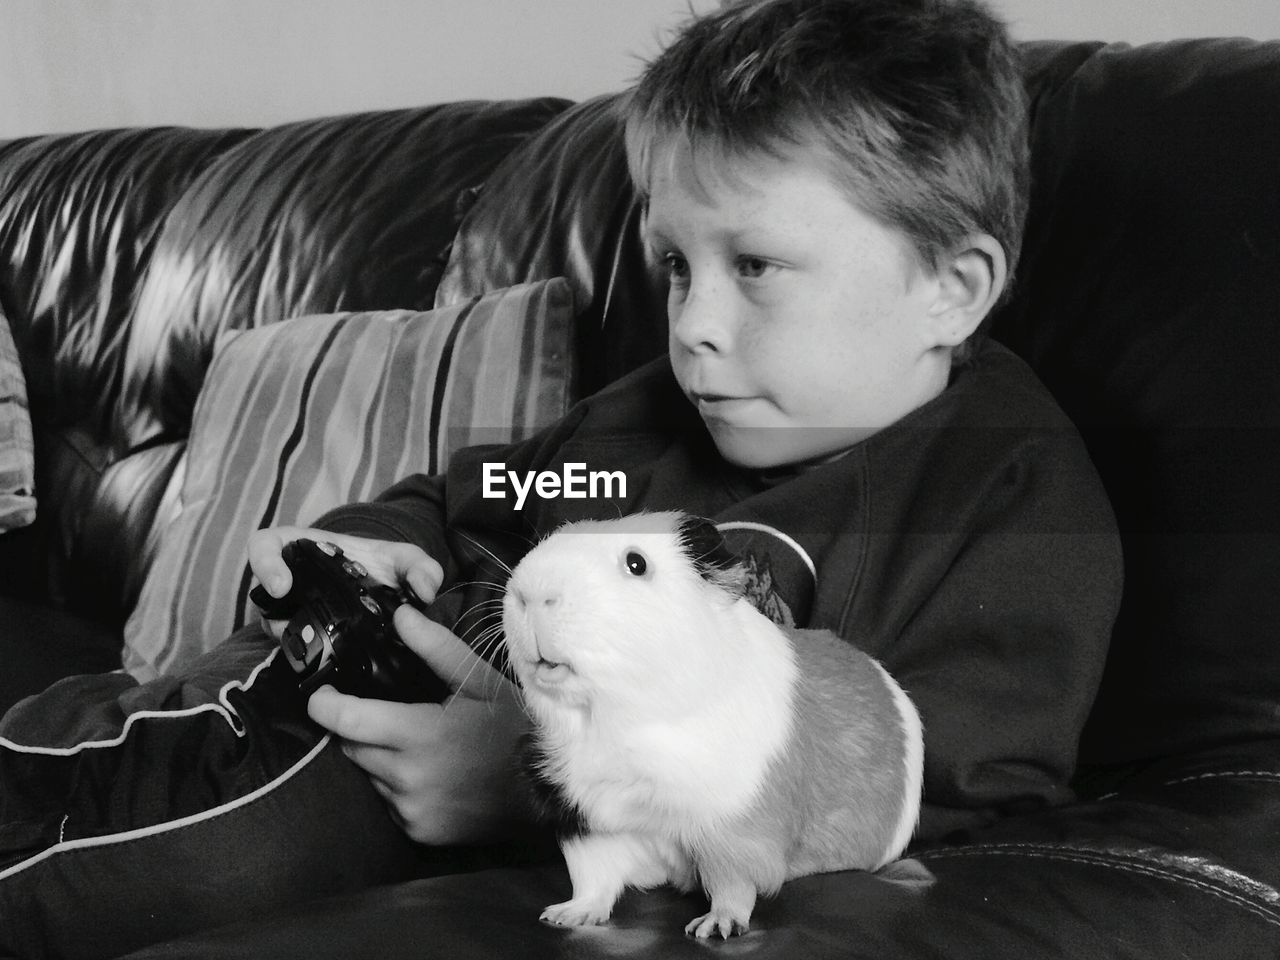 Boy playing video game by guinea pig on sofa at home